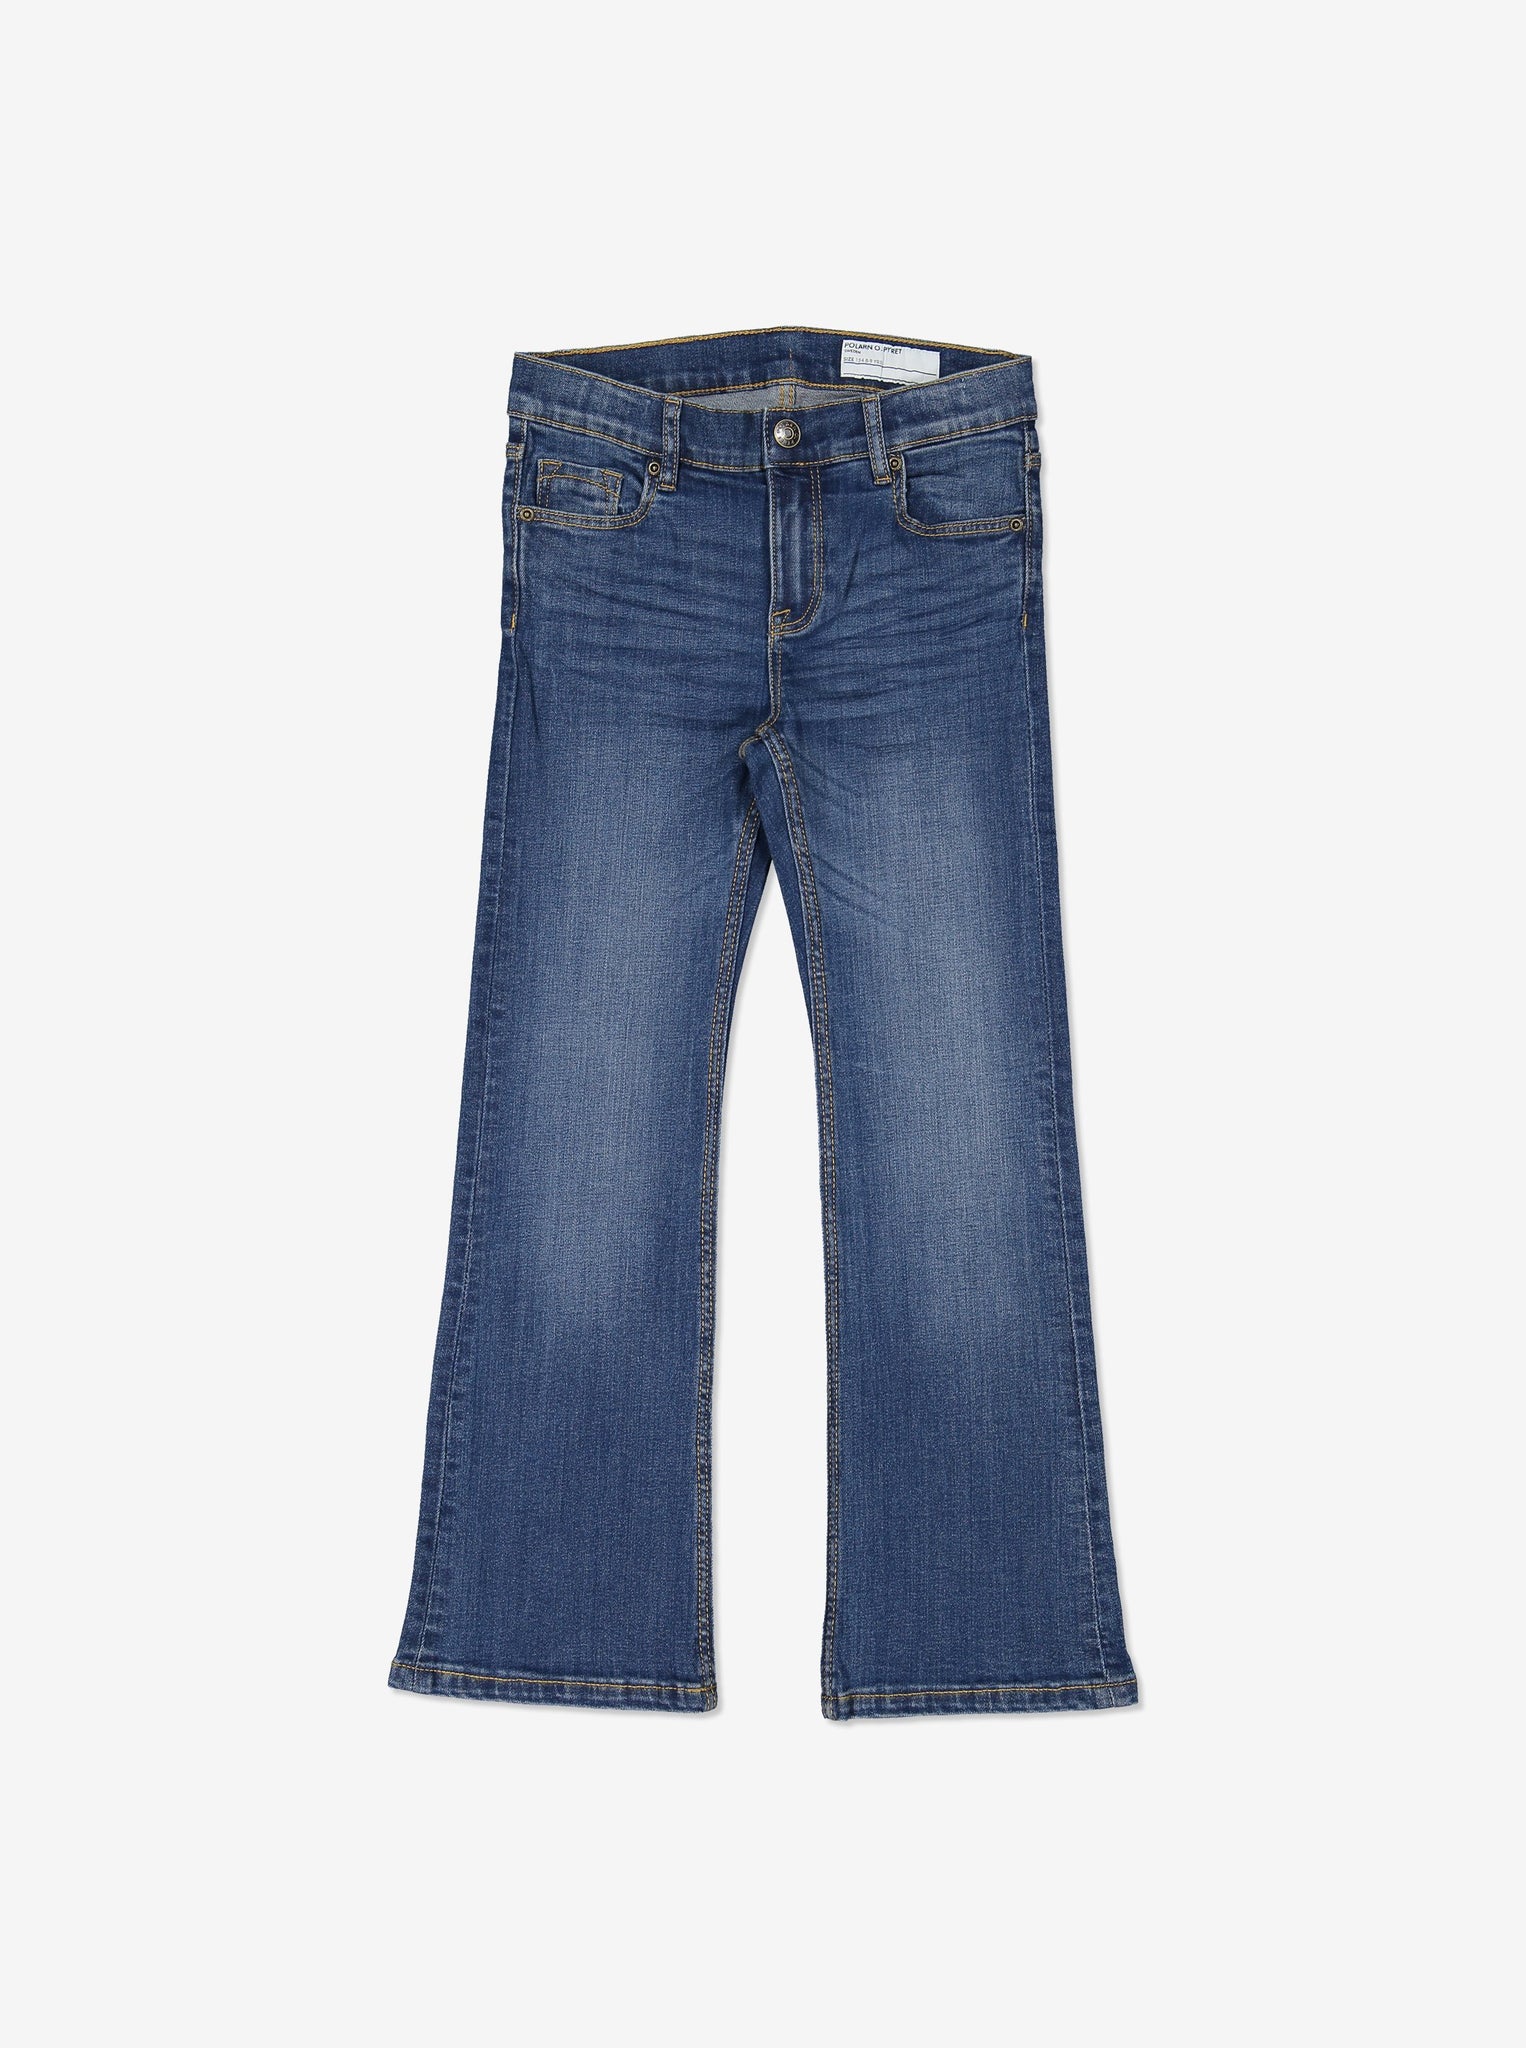 A pair of flared blue jeans for boys and girls with five pocket styling, signature PoP inverted metal rivets, adjustable waist and button and zip closure